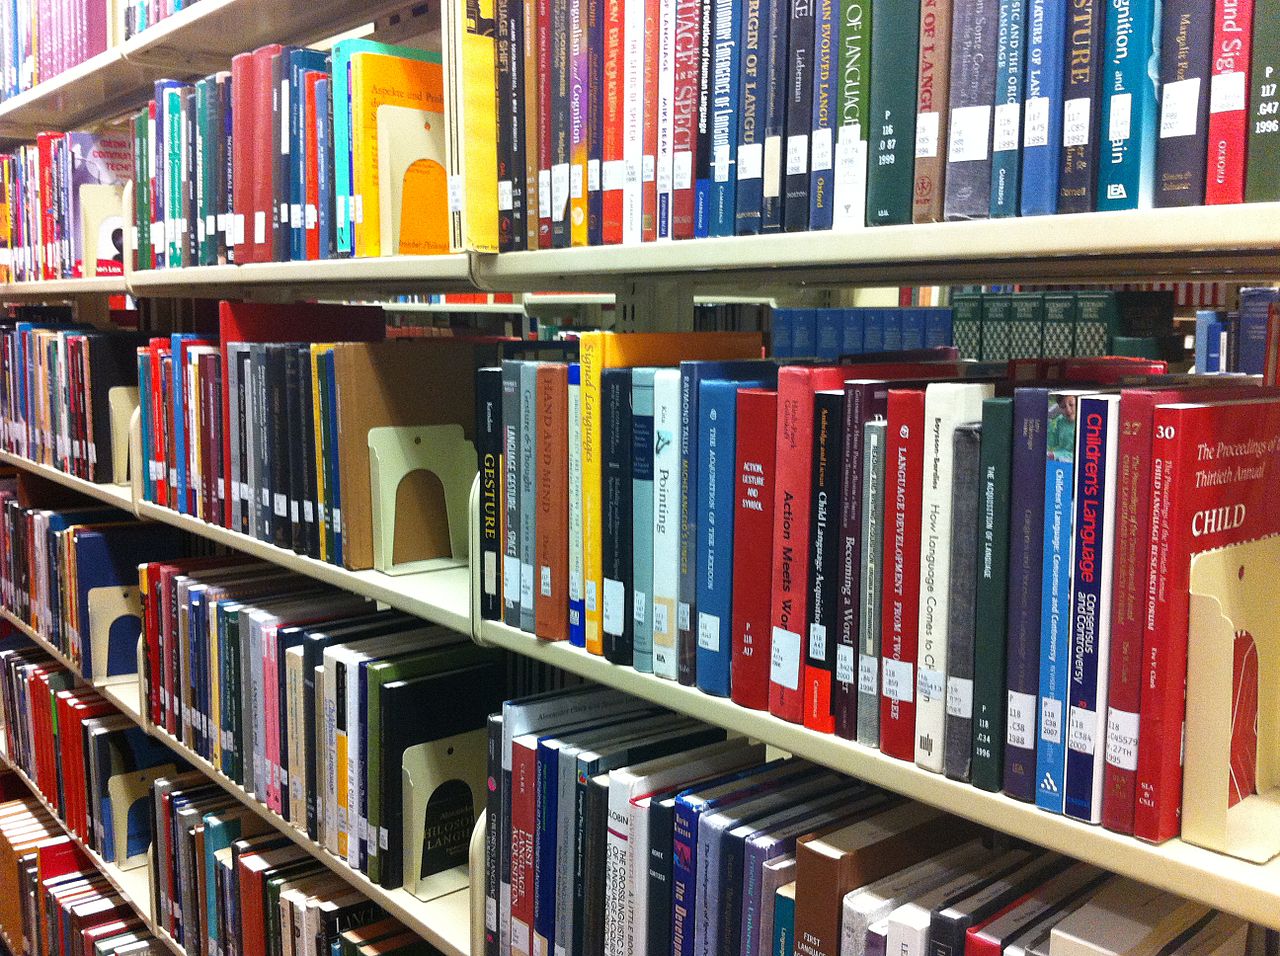 Source: https://commons.wikimedia.org/wiki/File:Shelves_of_Language_Books_in_Library.JPG